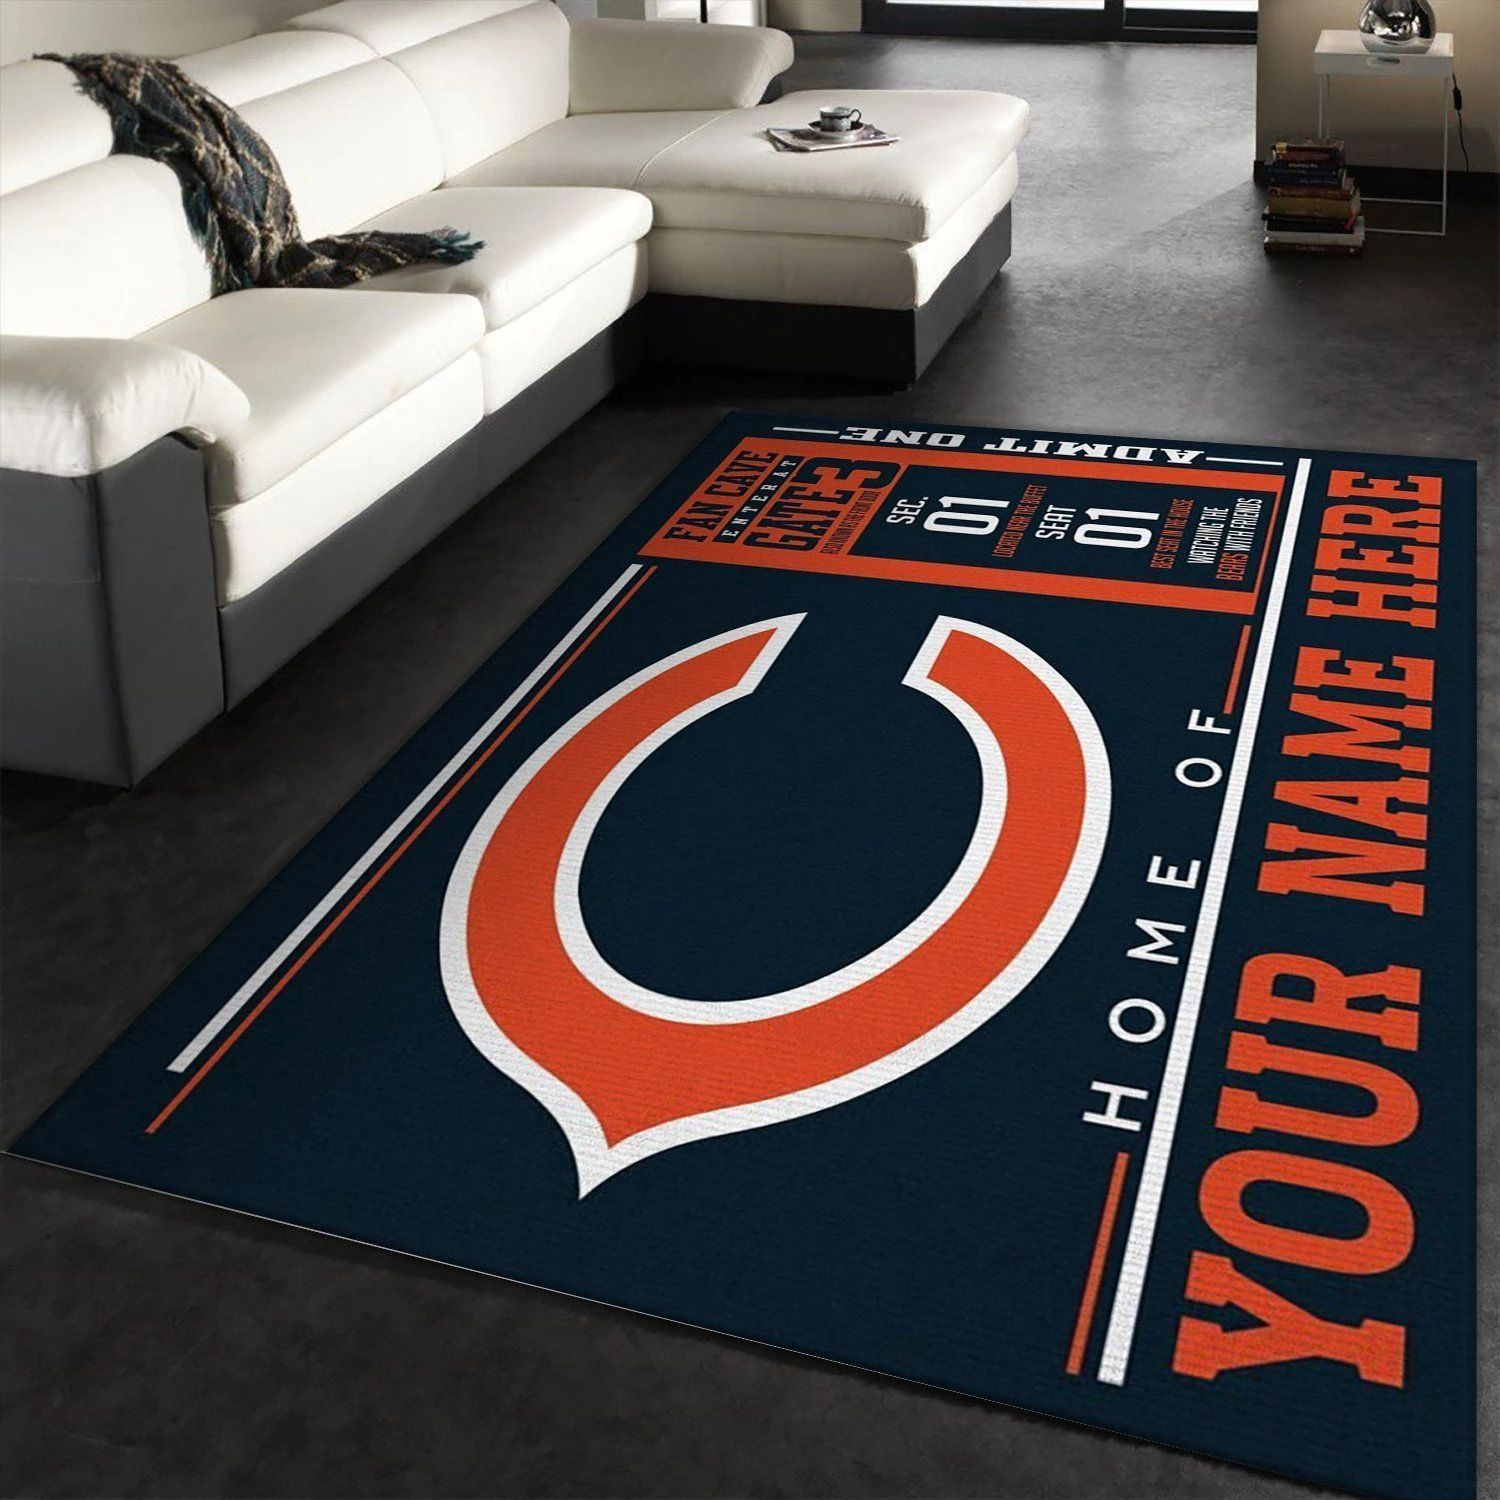 Customizable chicago bears wincraft personalized nfl team logos area rug- kitchen rug- us gift decor - indoor outdoor rugs - large (5ft x 8ft)